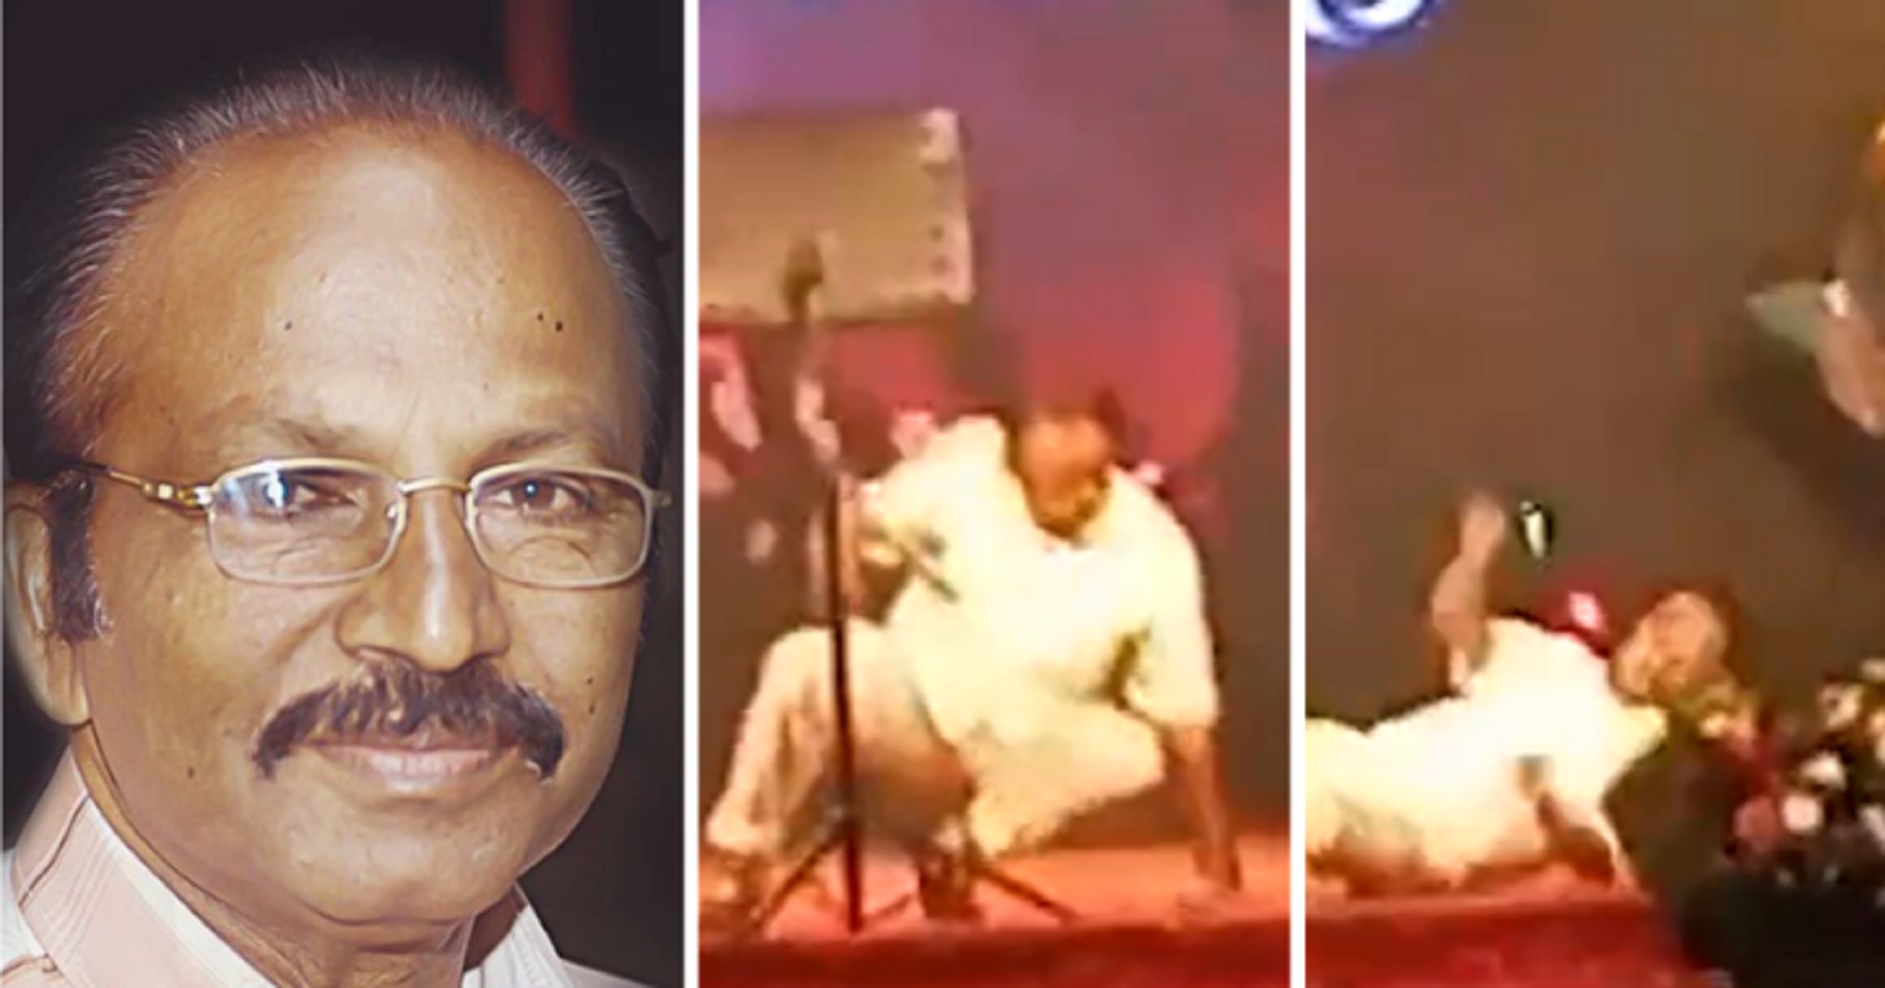 Veteran Singer Edava Basheer Dies Aged 78 After Collapsing On Stage During Live Performance